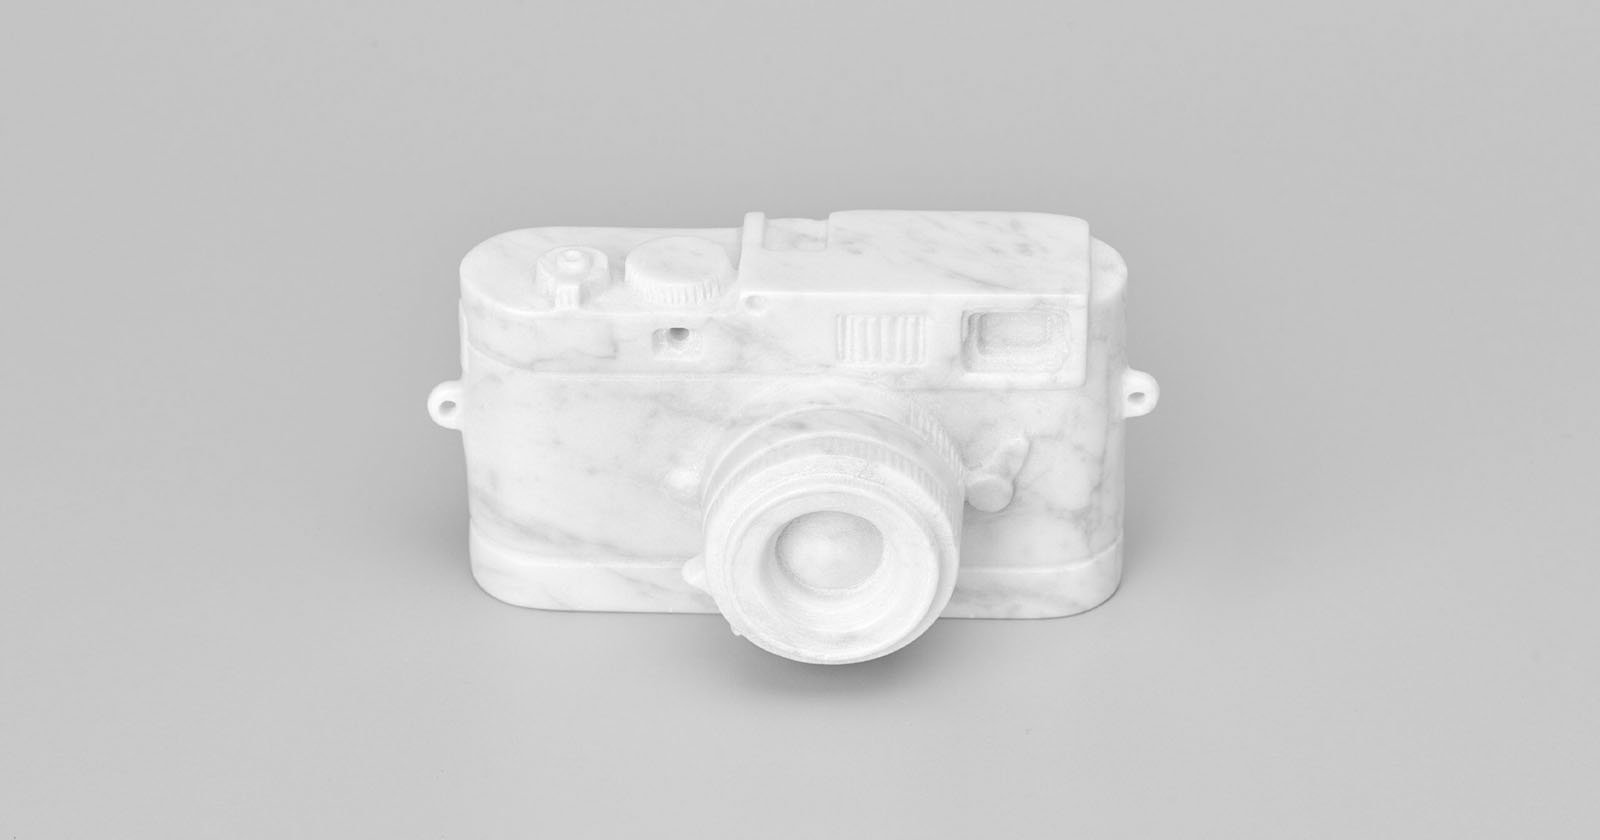 A Leica Store is Selling a One-of-a-Kind Marble Leica M Camera